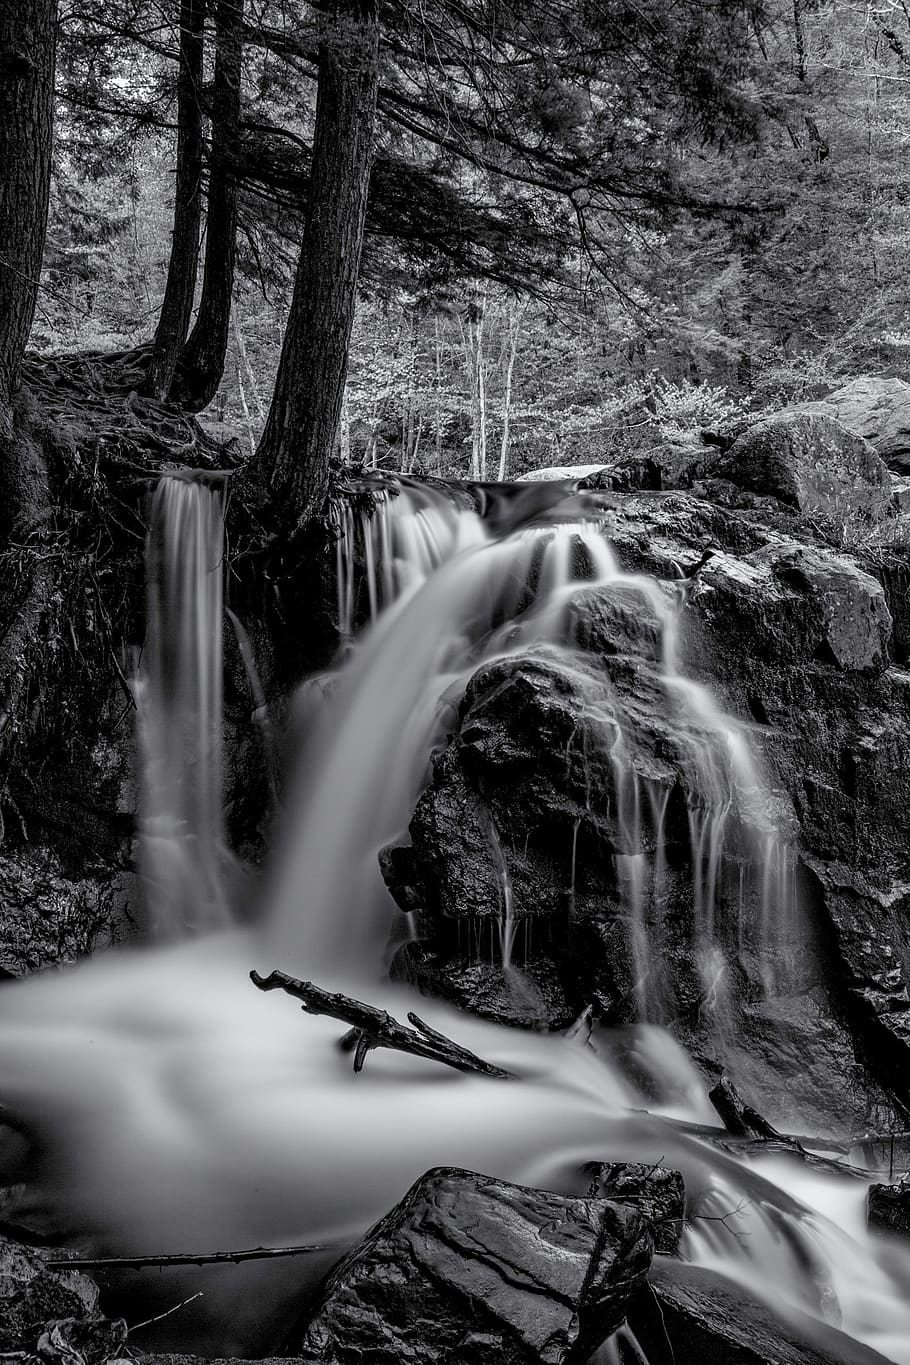 united states, buttermilk falls, long exposure, black and white